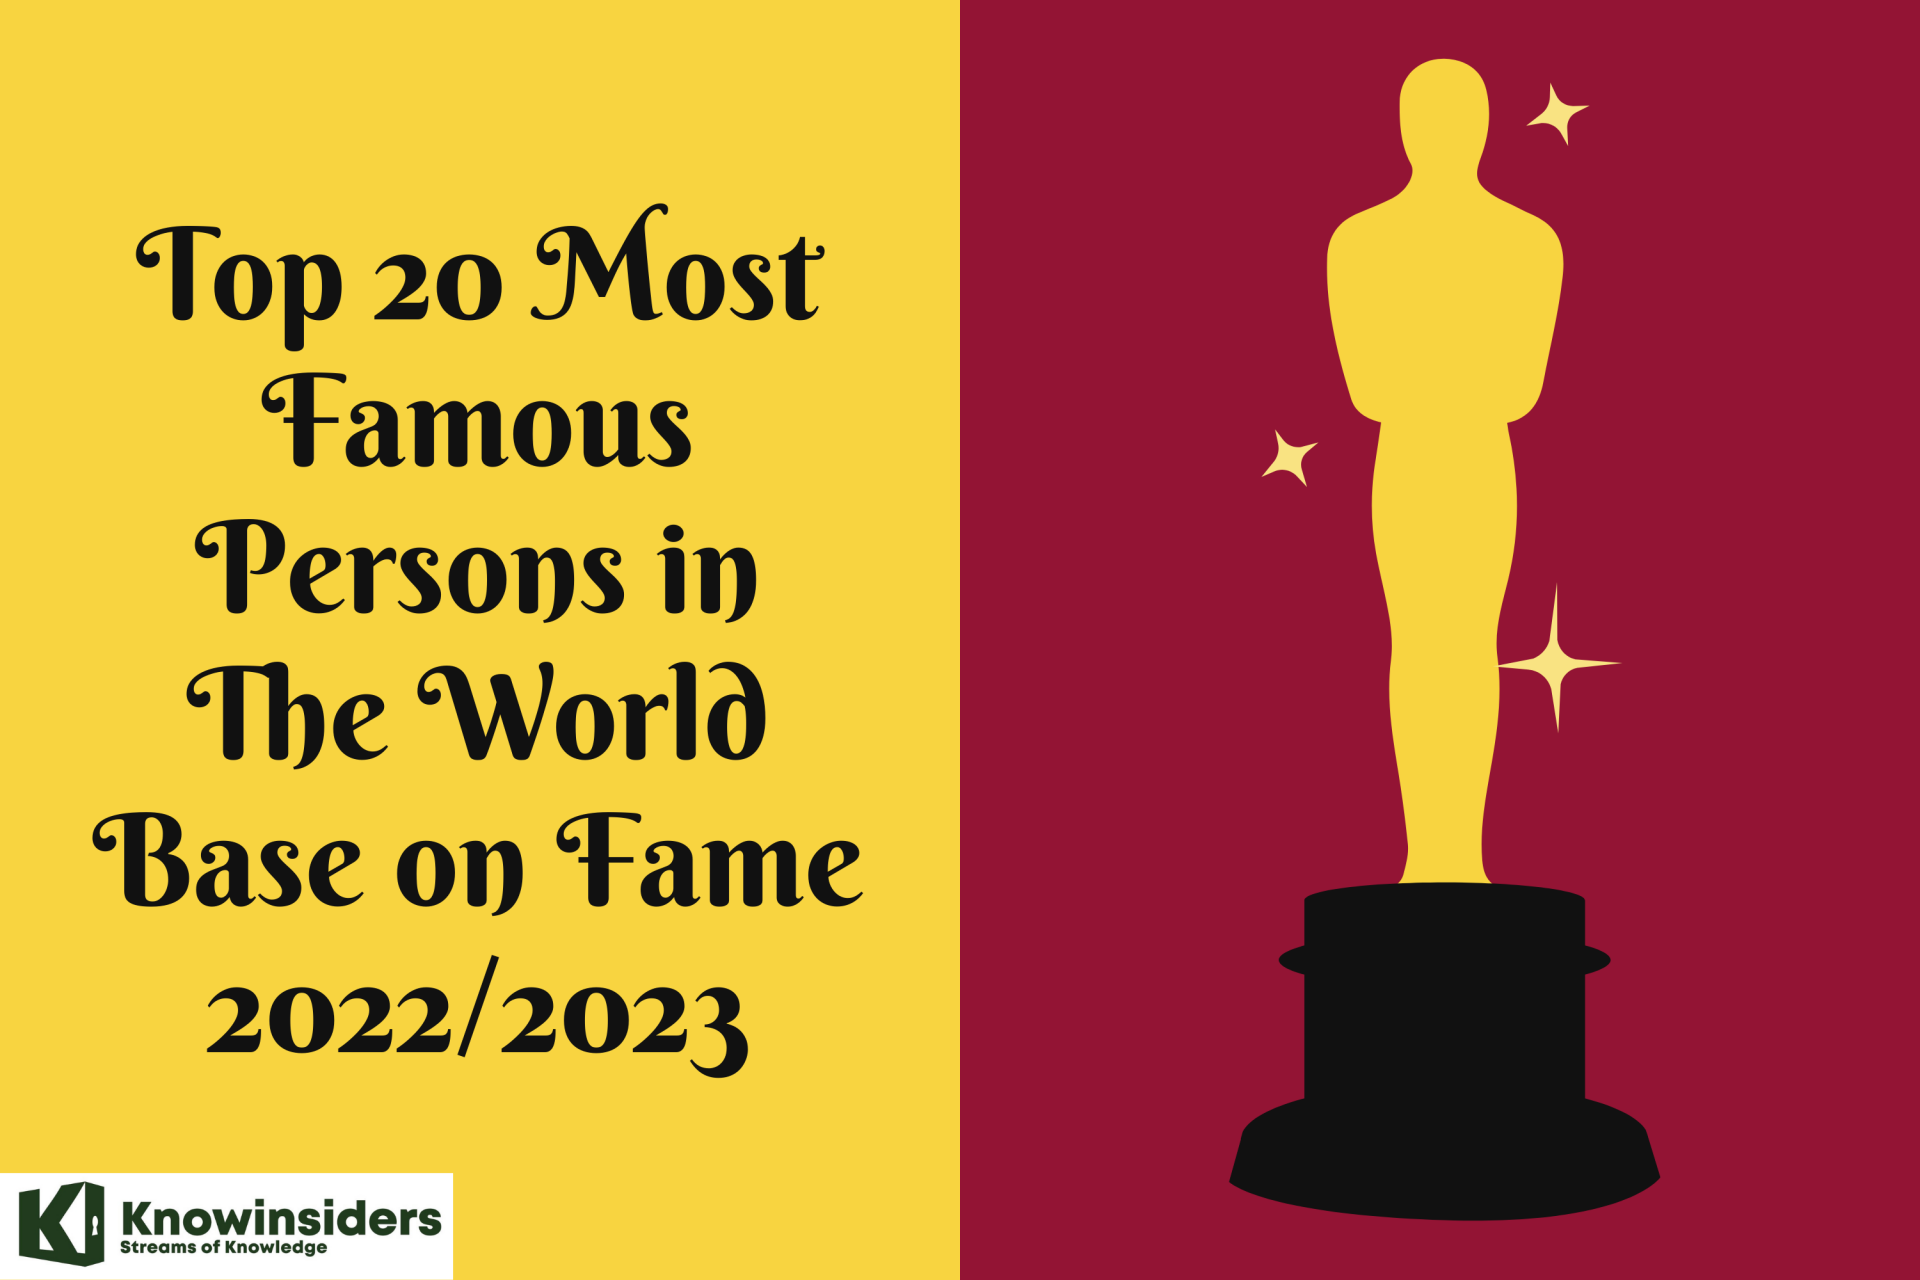 Top 20 Most Famous Persons in The World Base on Fame Right Now